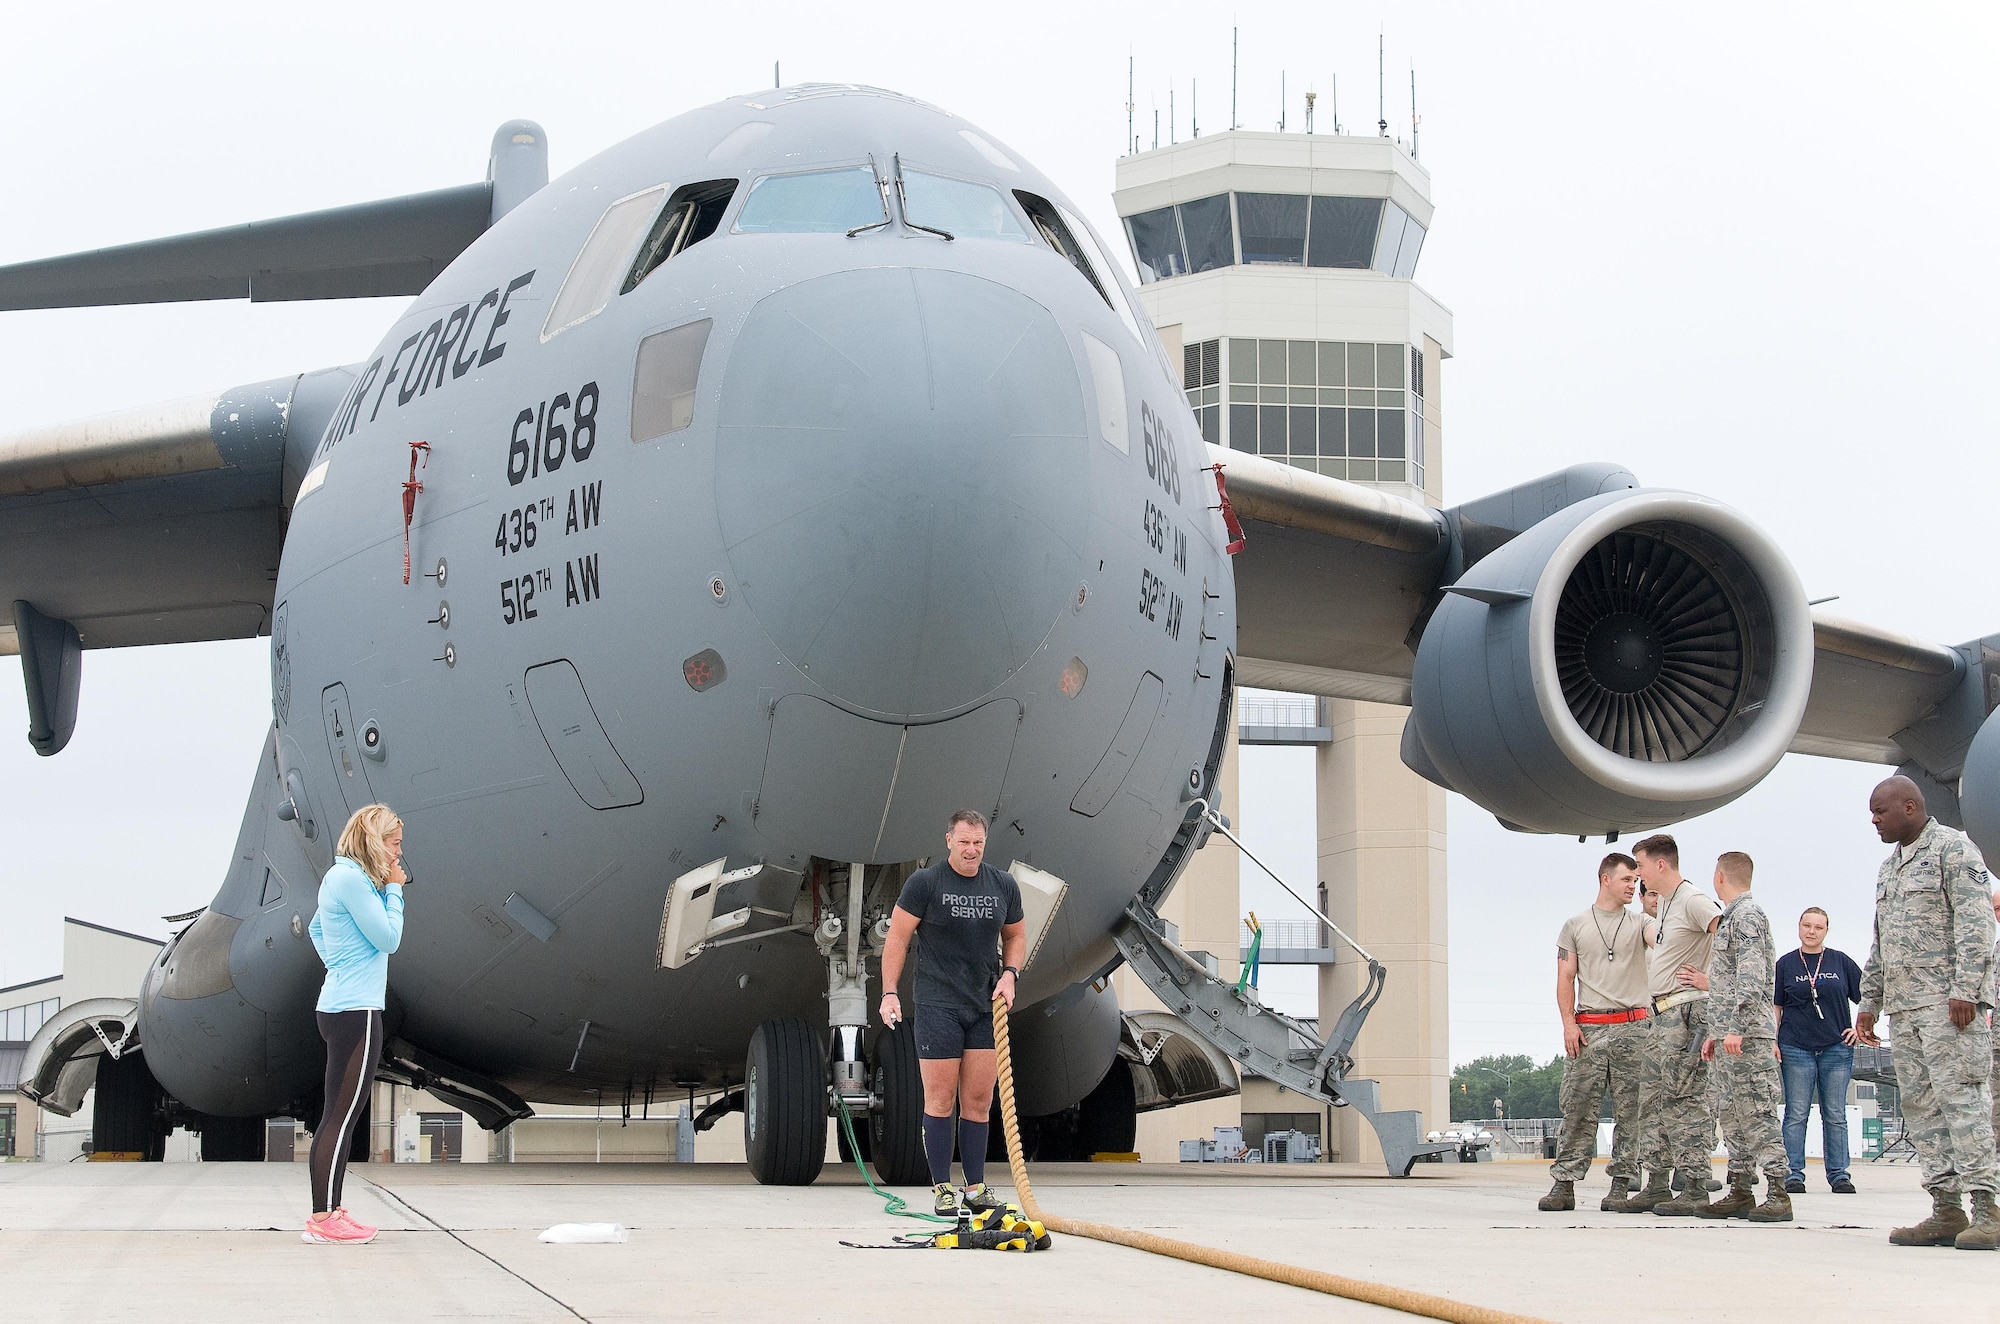 Cmdr. Grant Edwards, Australian Federal Police, Embassy of Australia, Washington, D.C., lines up his rope used for grip prior to his second attempt at pulling a C-17 Globemaster III, June 16, 2017, on Dover Air Force Base, Del. Kate Lord, Edwards’ wife, left, and members of the 712th and 736th Aircraft Maintenance Squadrons watched Edwards, an Australian strongman athlete, attempt to pull the C-17 weighing approximately 418,898 pounds. (U.S. Air Force photo by Roland Balik)